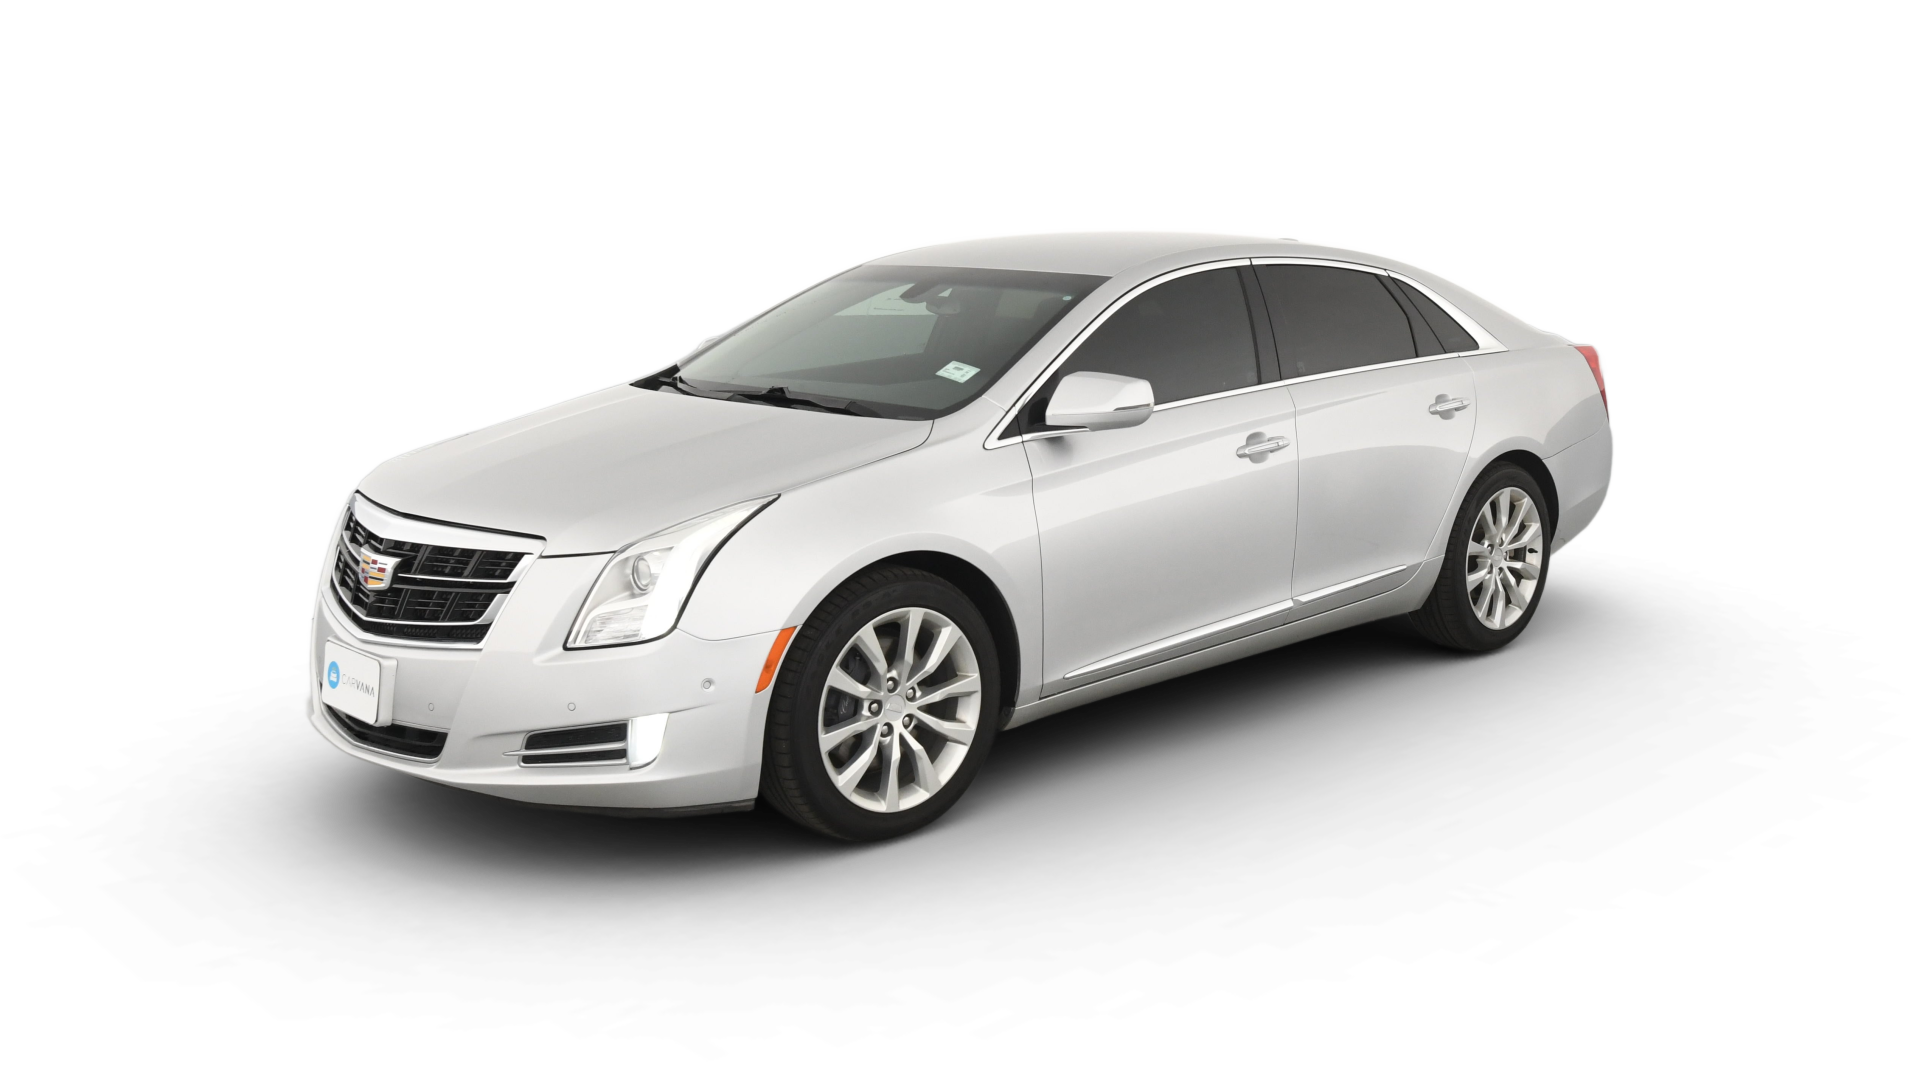 Used 2017 Cadillac XTS For Sale Online | Carvana